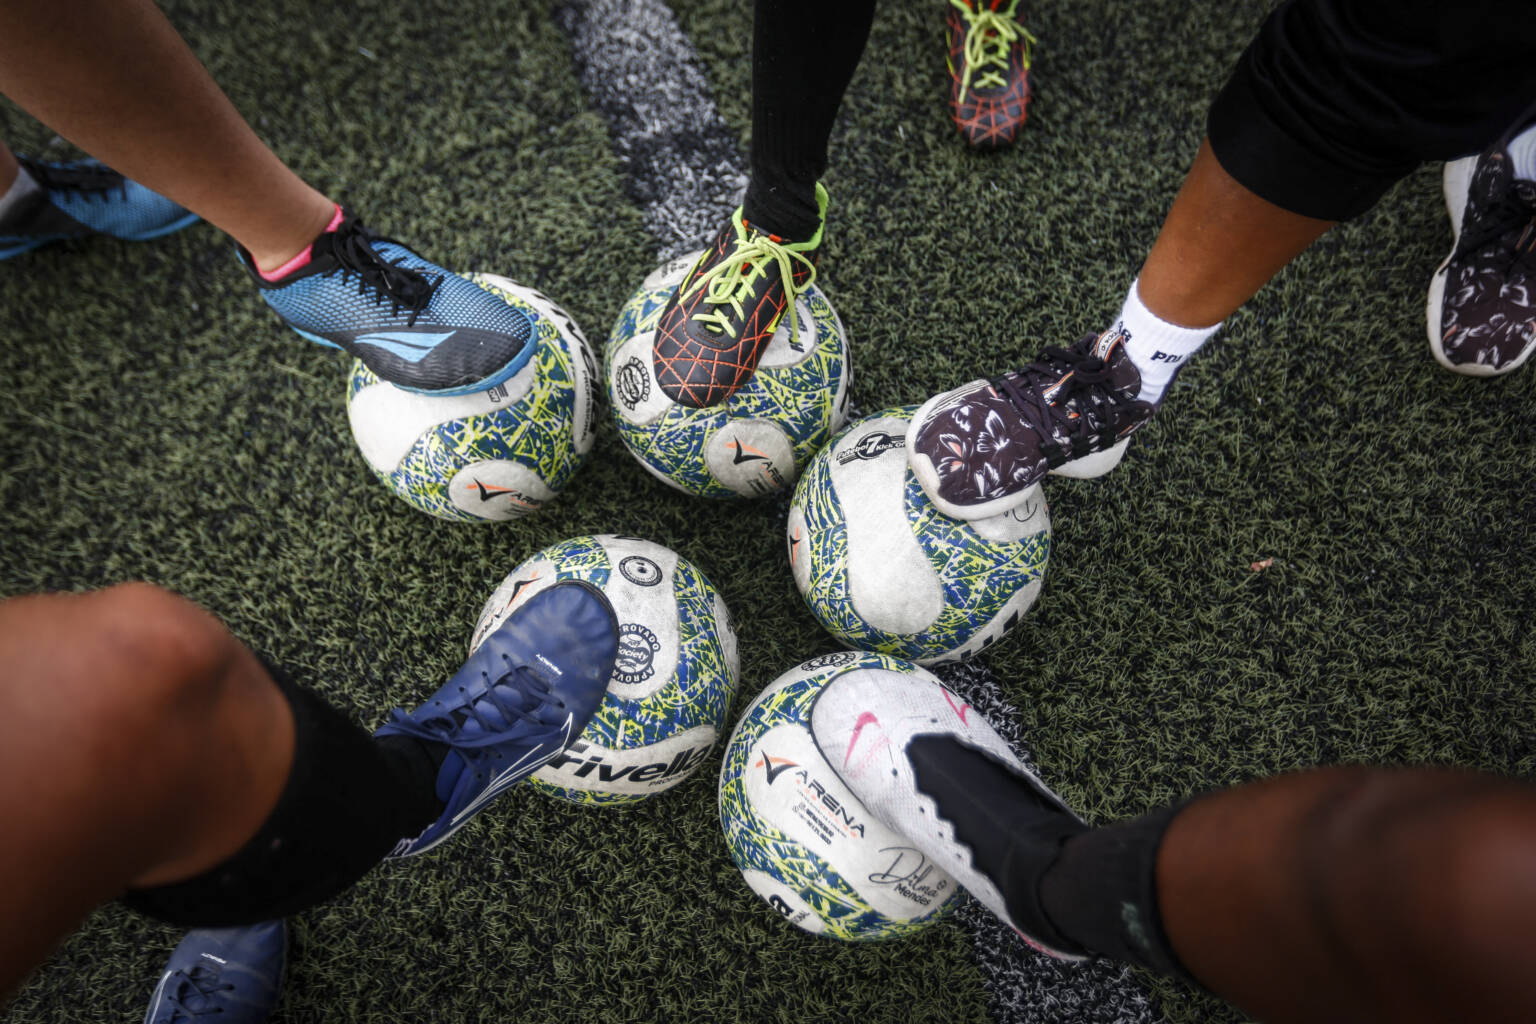 Players pose for a picture with their feet on balls during a training session led by women's football coach Dilma Mendes, 59, at the Arena 2 de Julho Football School located in the city of Camacari, Bahia state, Brazil, on July 5, 2023. Brazilian Dilma Mendes, does not remember how many times she was arrested as a kid. Her crime? Playing football in a country that banned women from the beautiful game for nearly four decades. (Photo by RAFAEL MARTINS / AFP) (Photo by RAFAEL MARTINS/AFP via Getty Images)